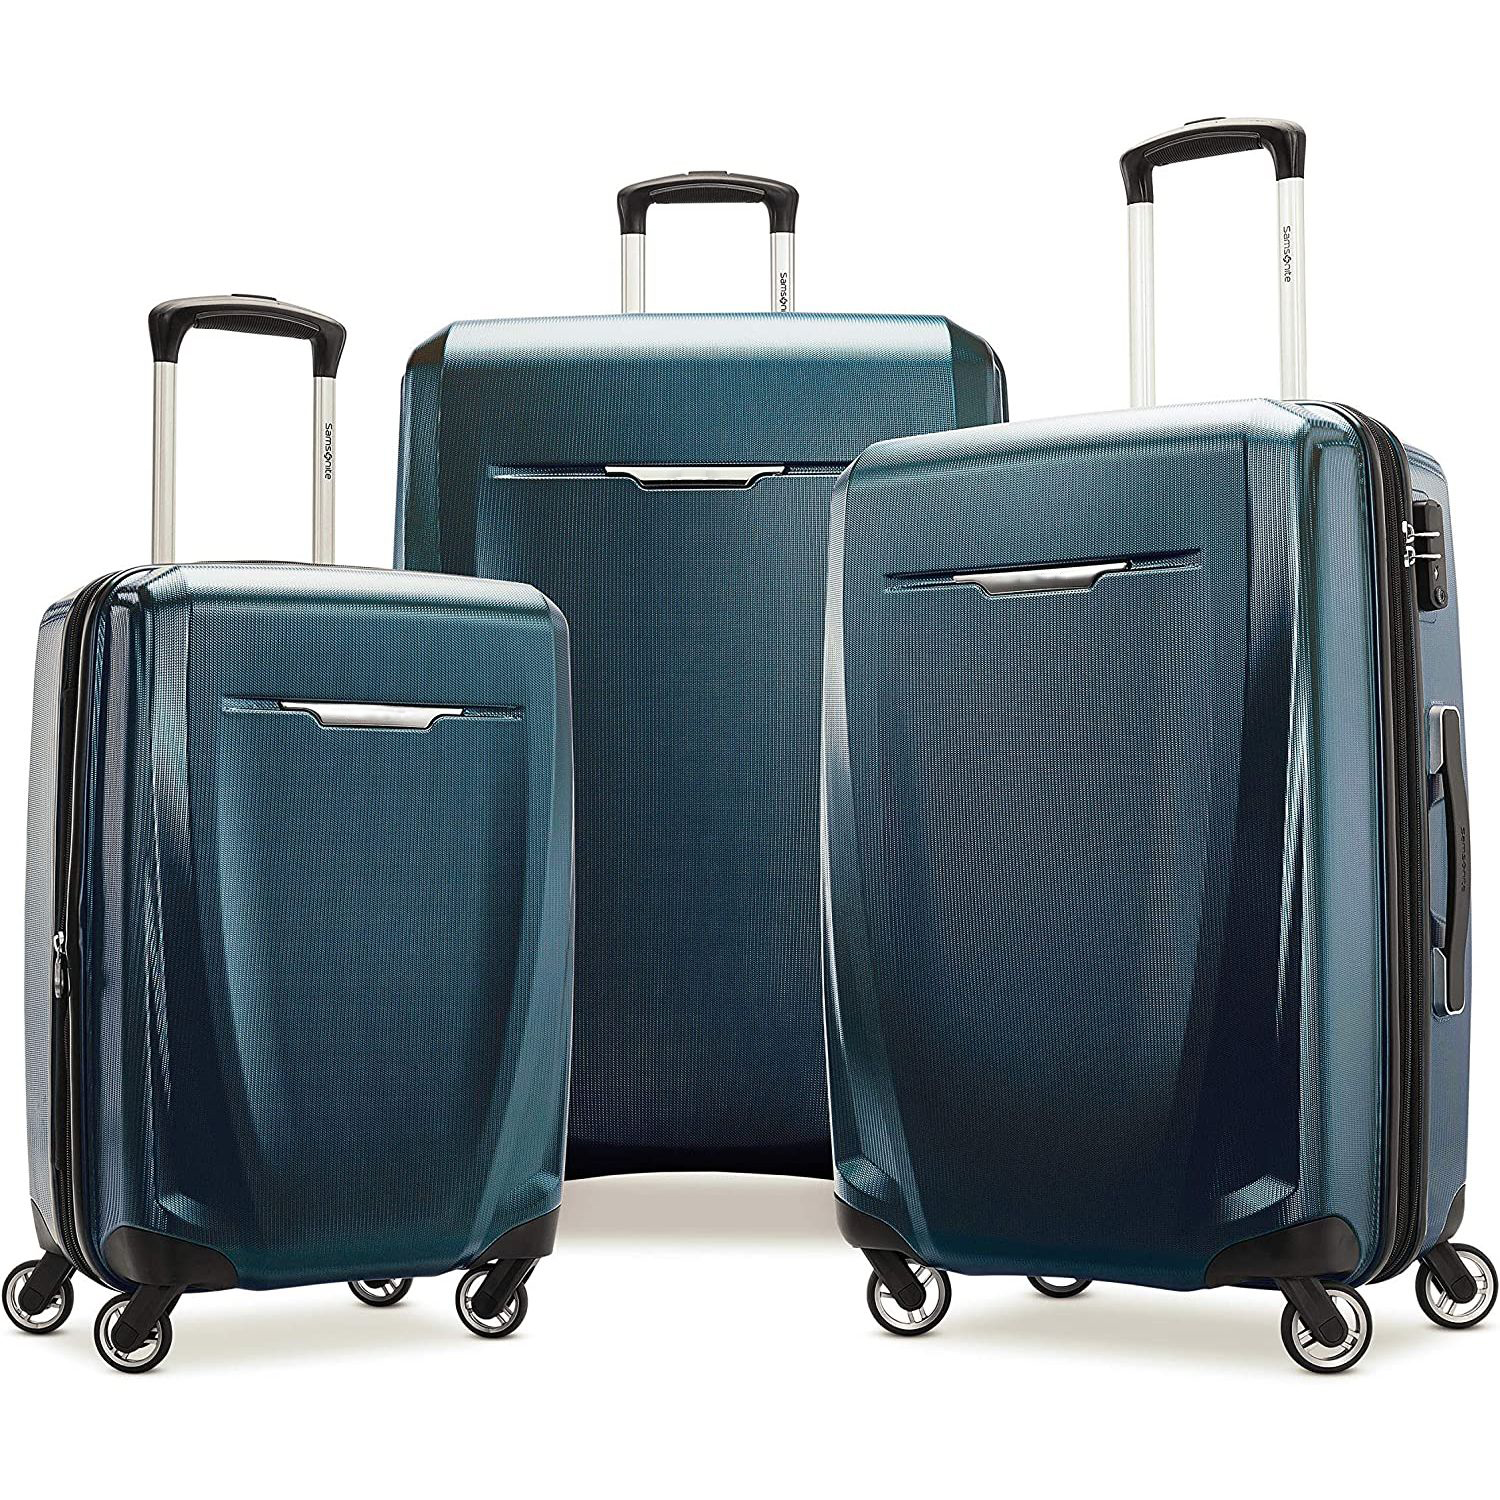 3 DLX Hardside Luggage with Spinners, 3-Piece Set